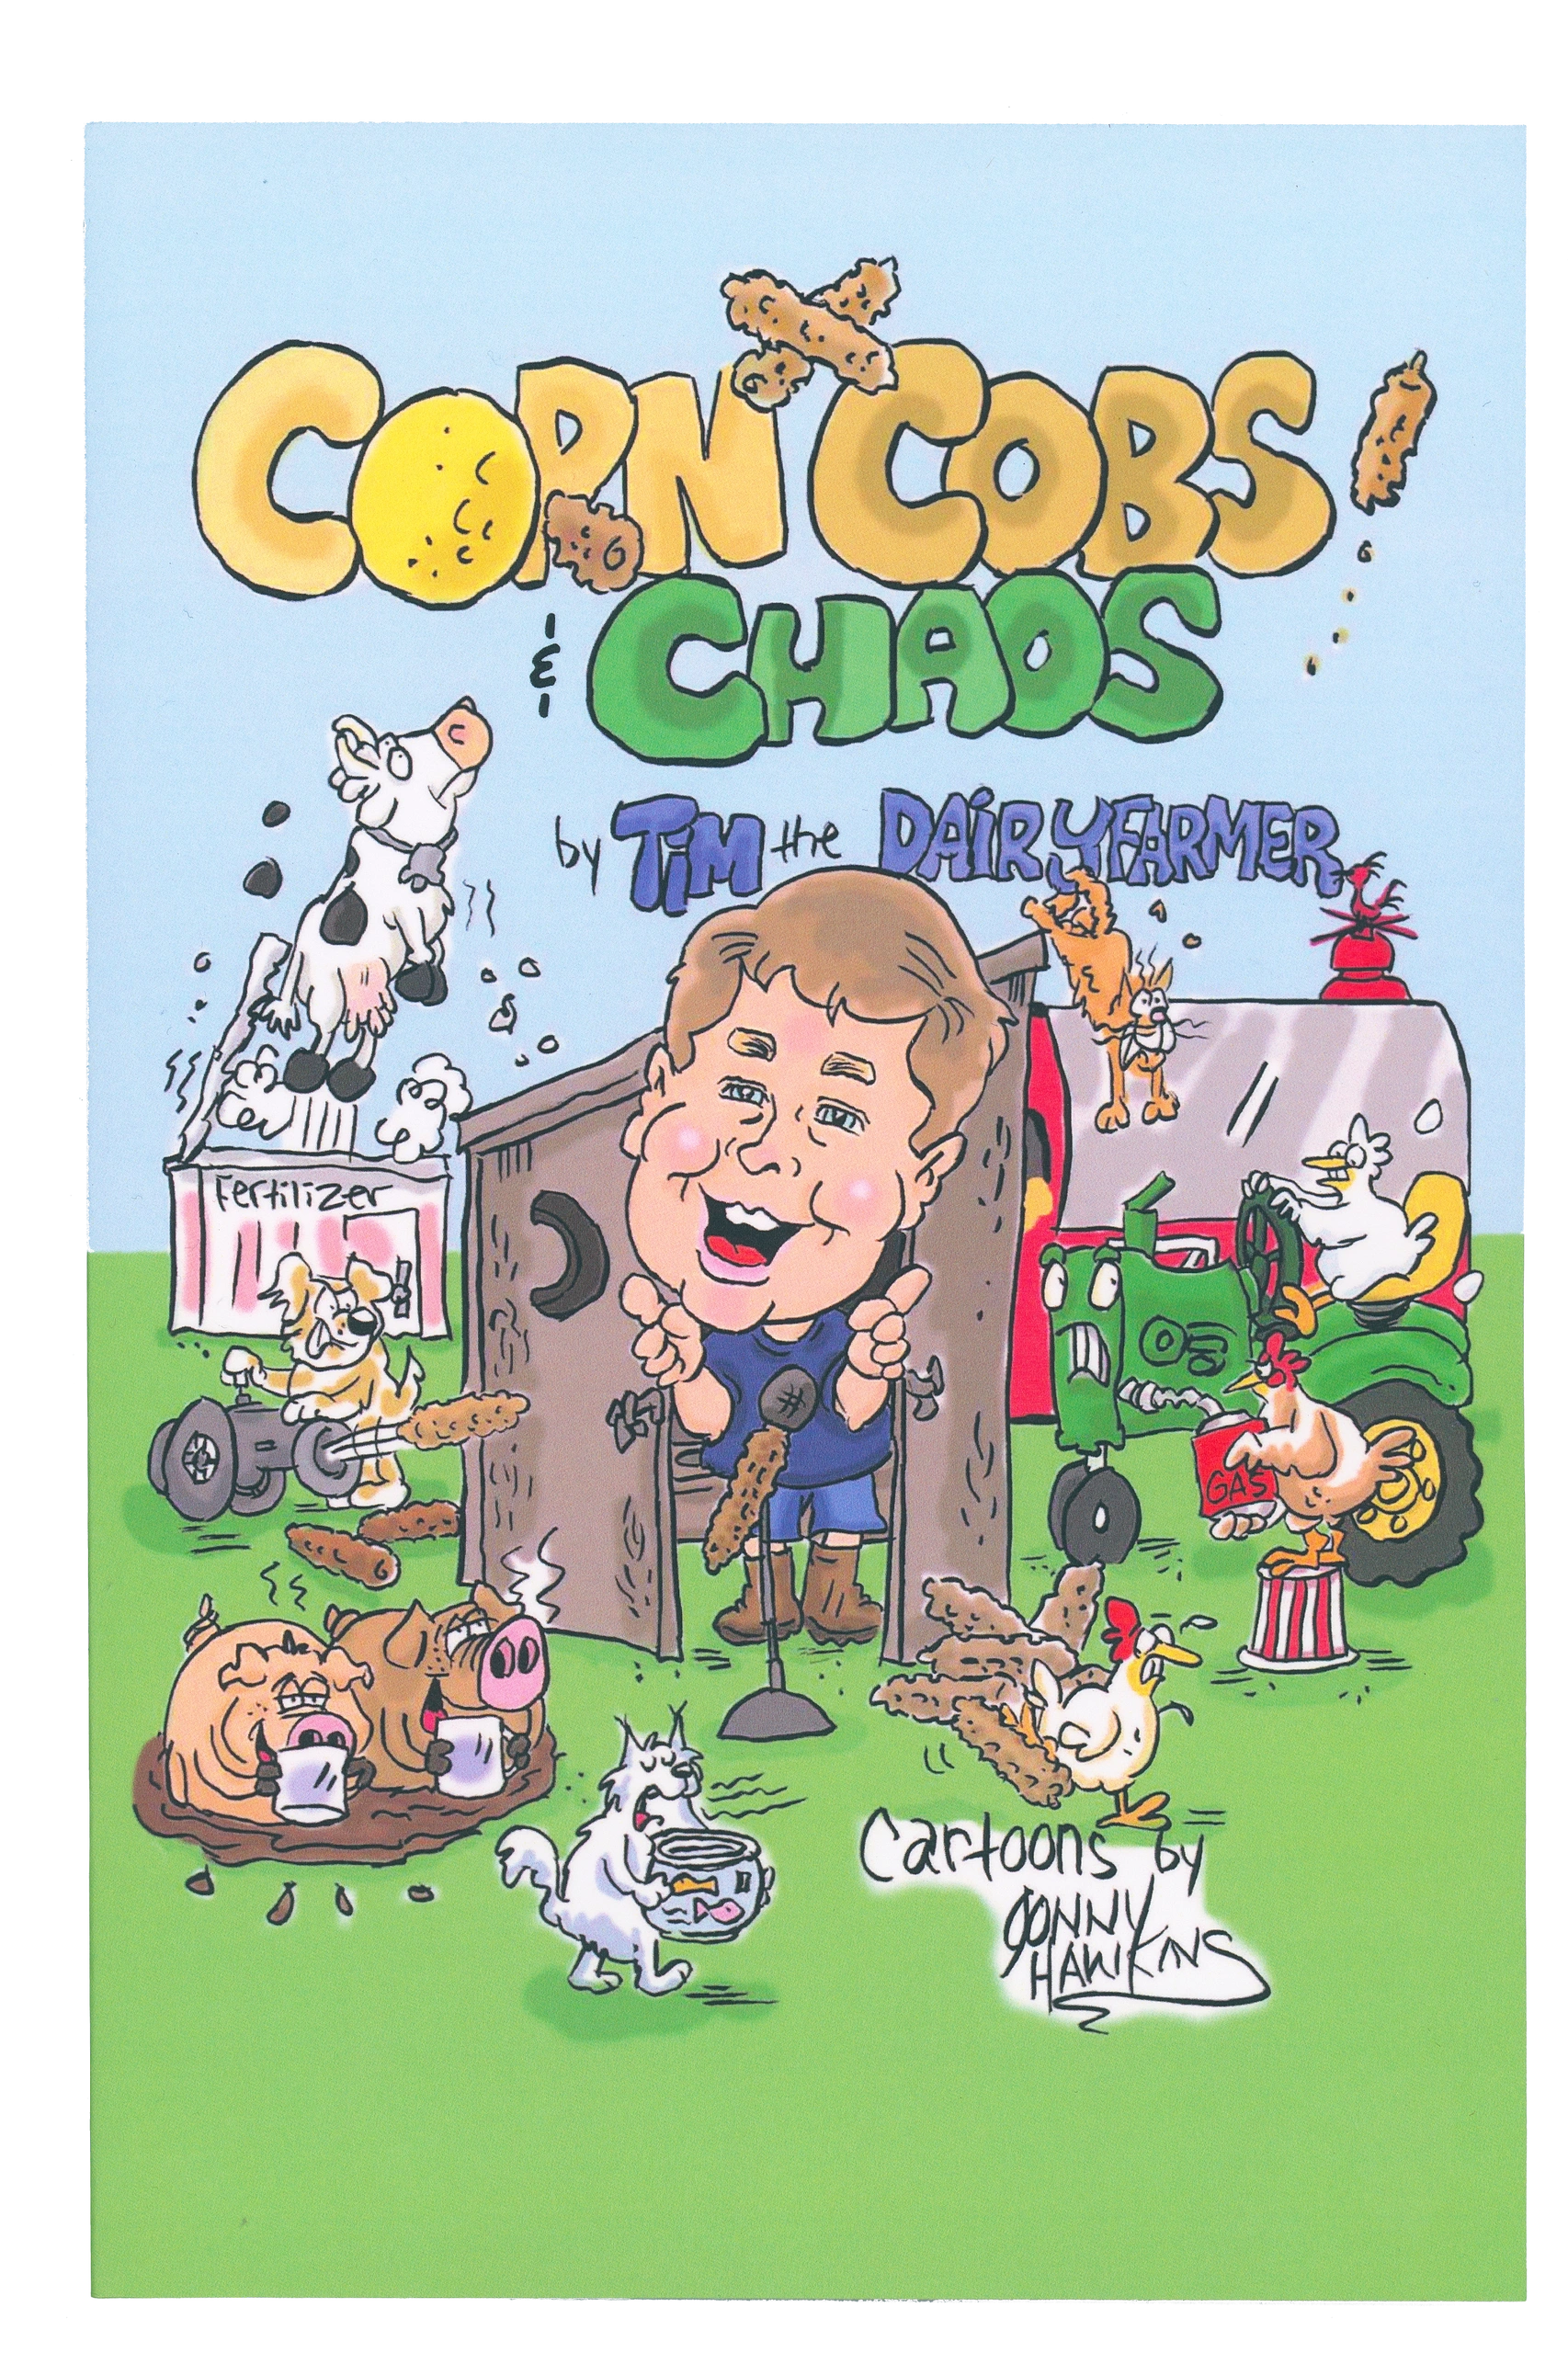 Corn Cobs & Chaos is comprised of some humorous blogs Tim the dairy farmer has written